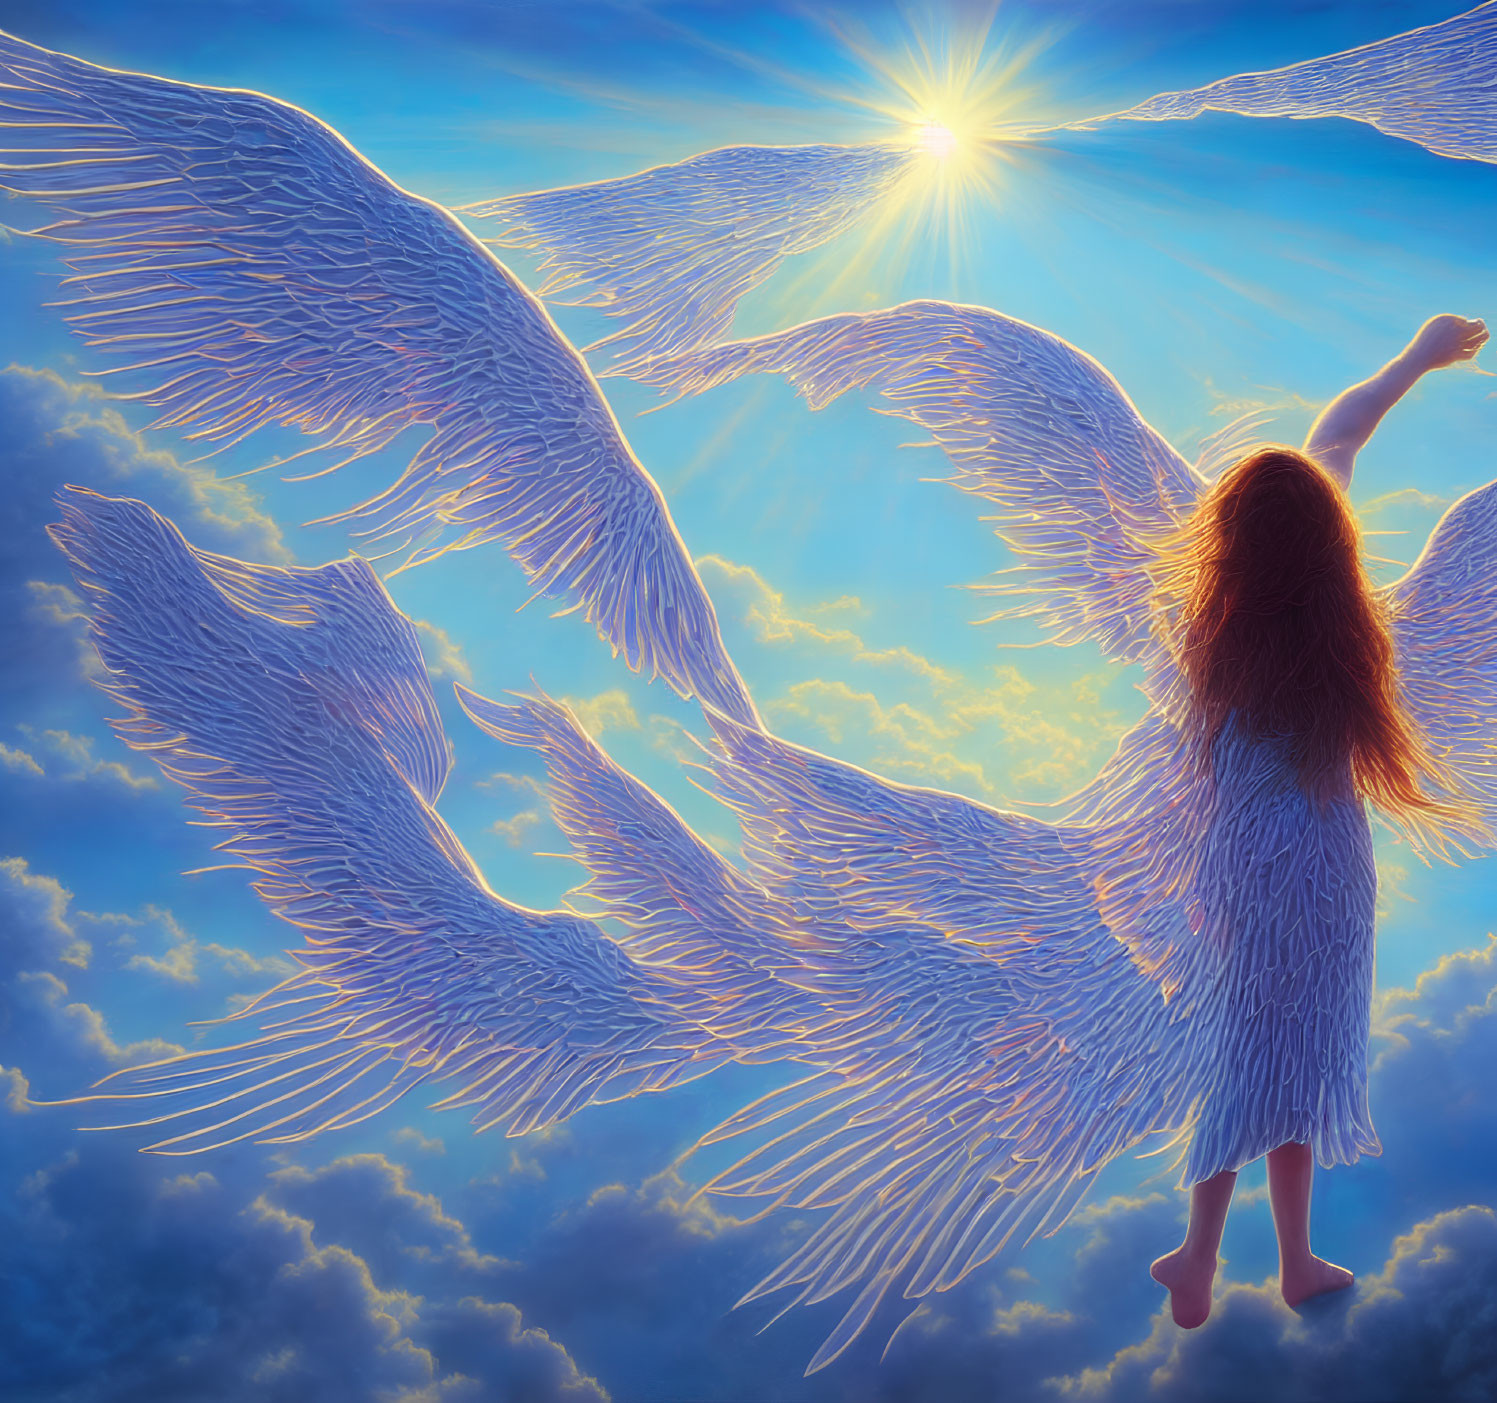 Fantasy image of a woman with large ethereal wings under a bright sun